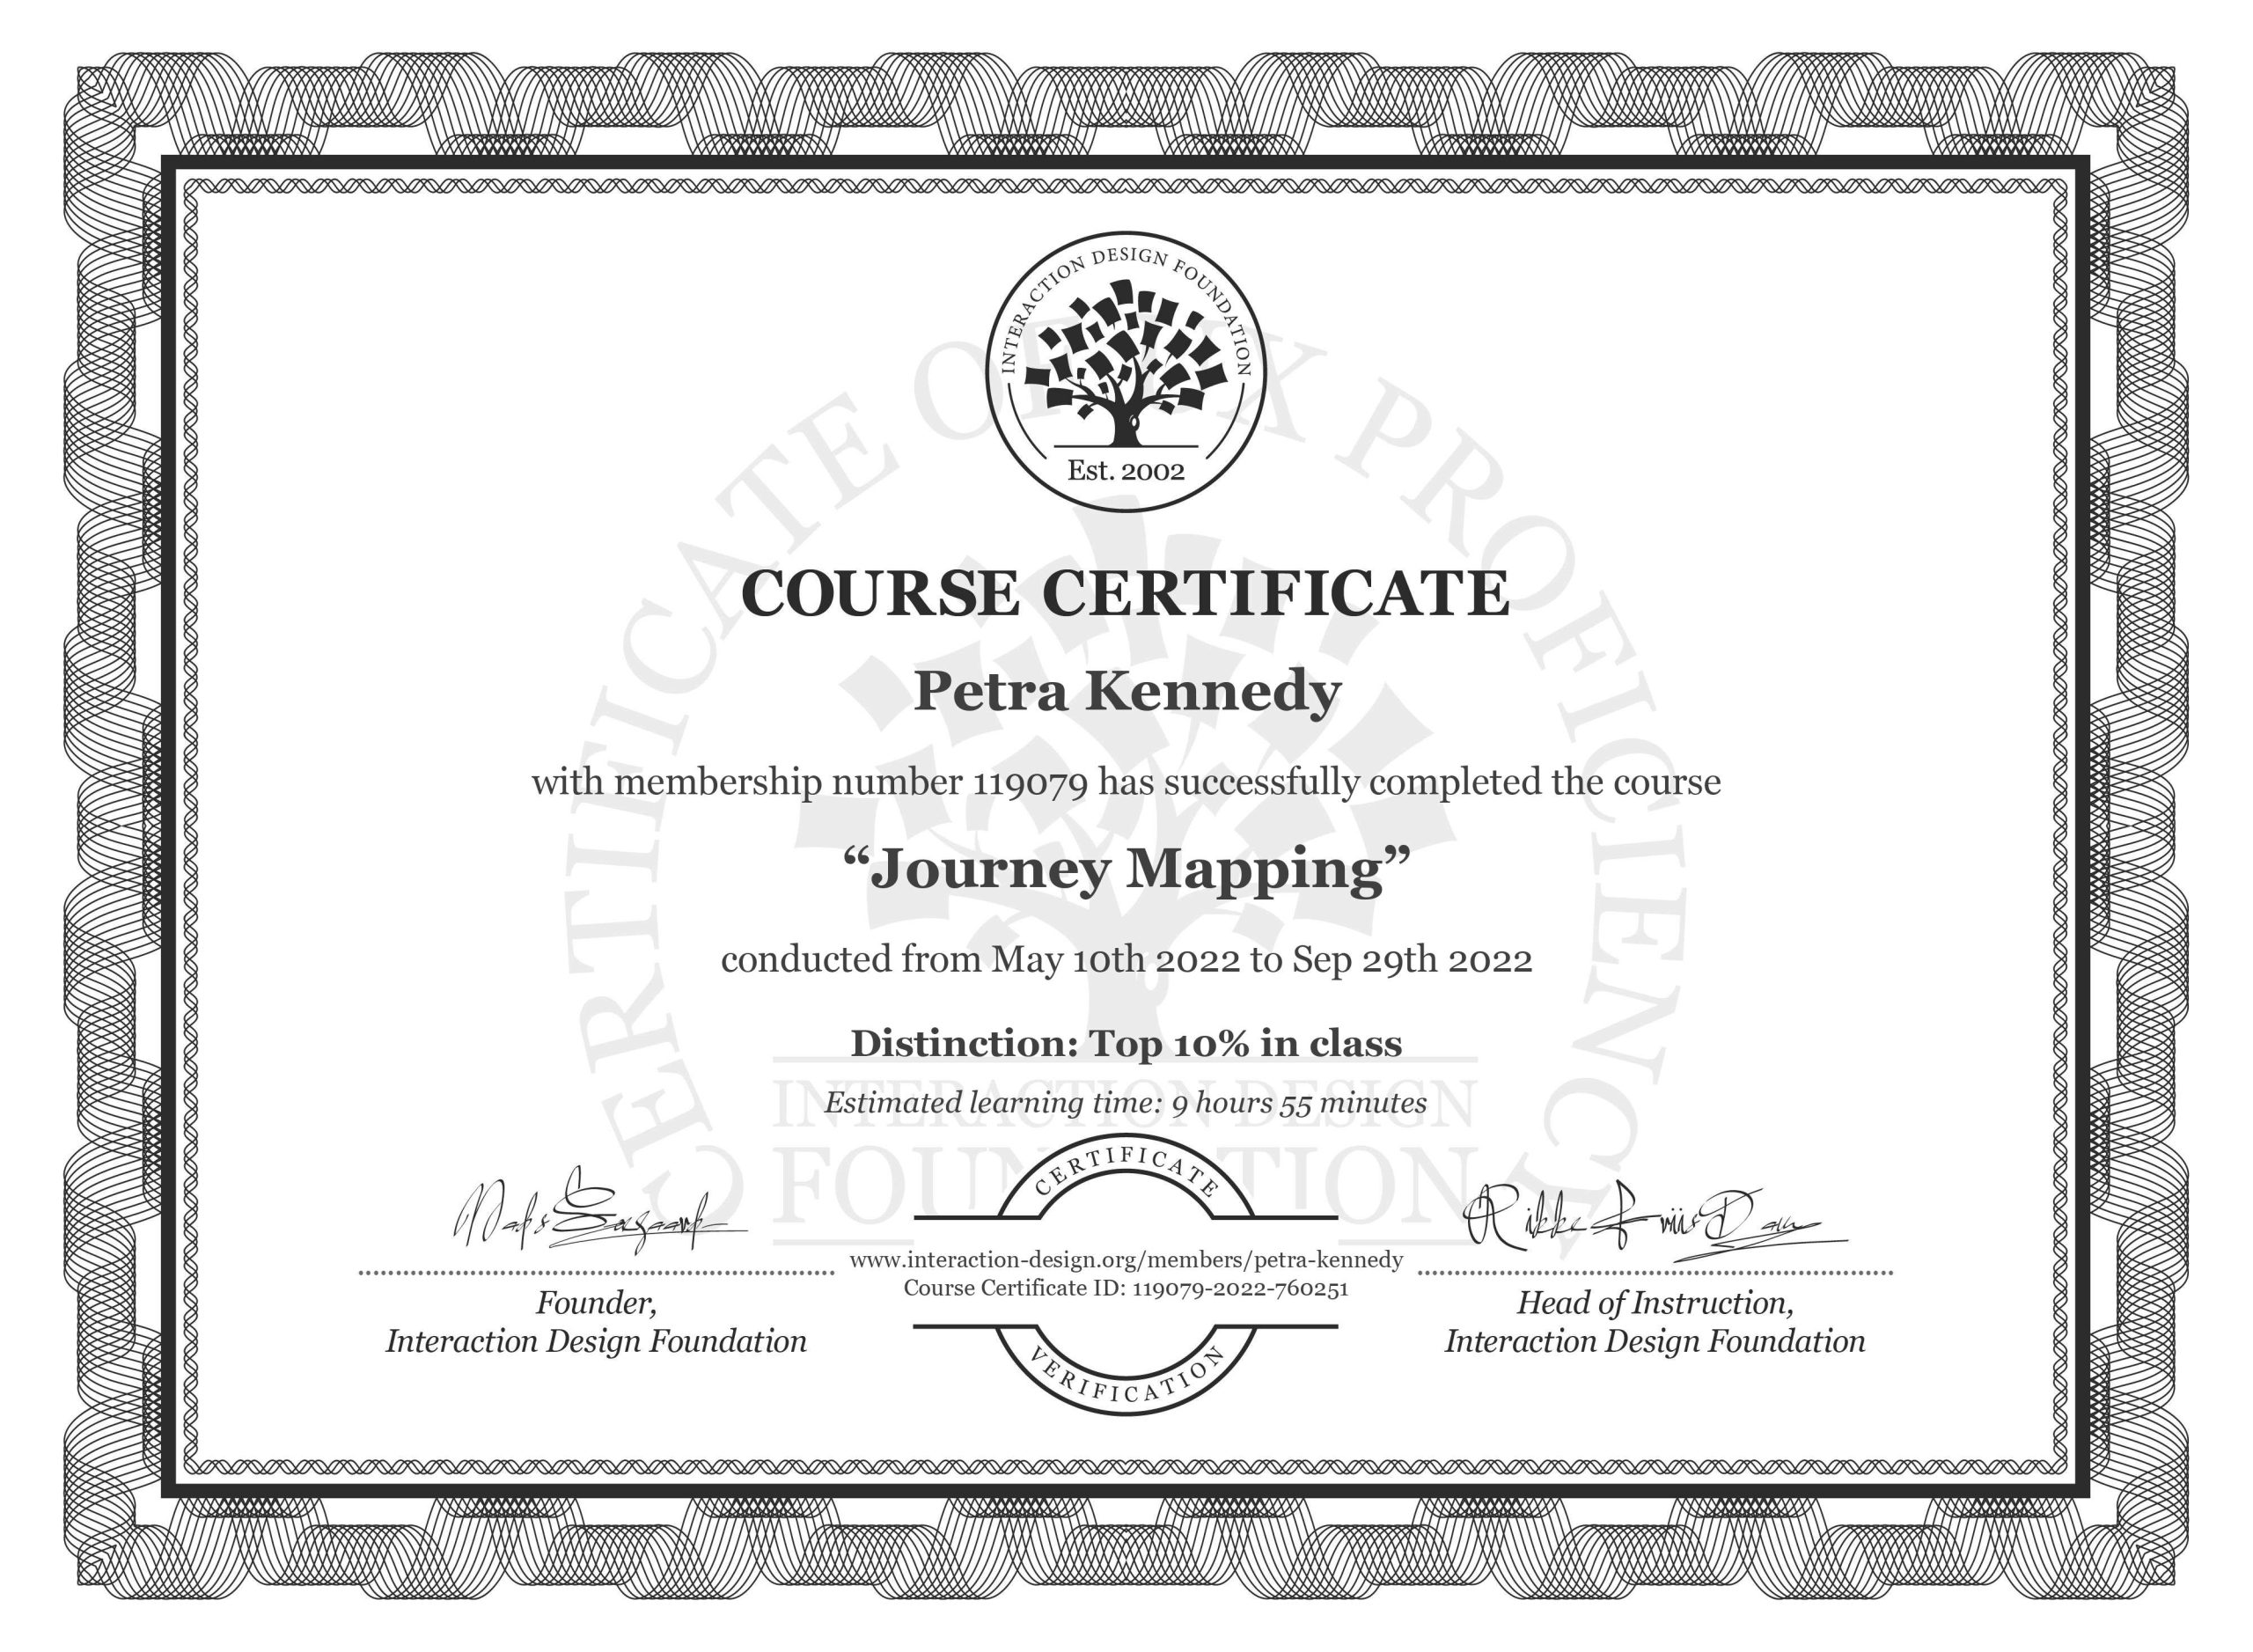 IxDF course certificate Journey Mapping